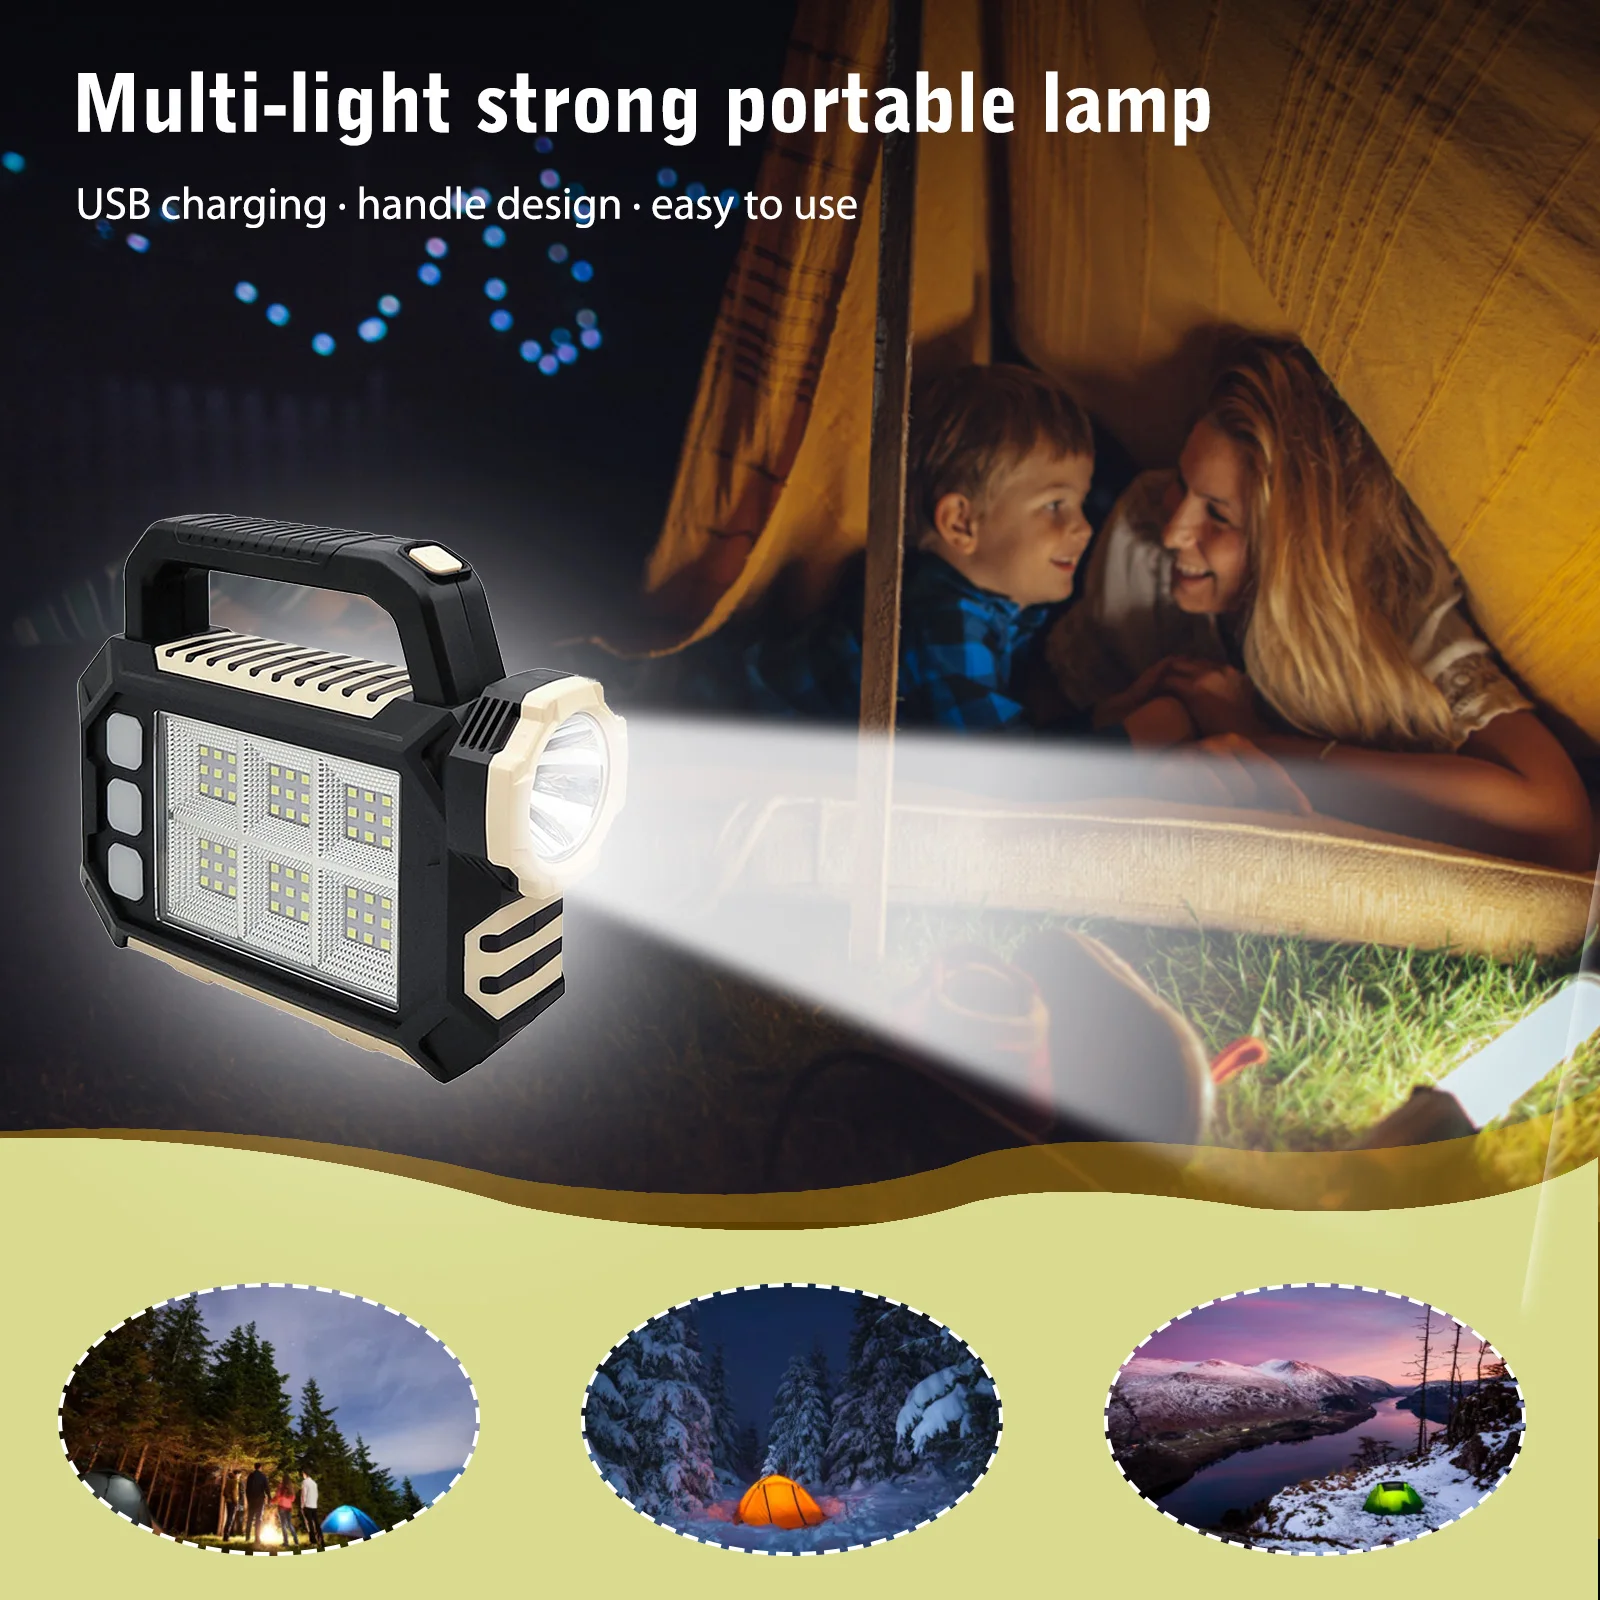 

Solar LED High Beam Torch USB Charging 1200mAh Portable Lamp Torches 3 Light Sources High Power Waterproof for Outdoor